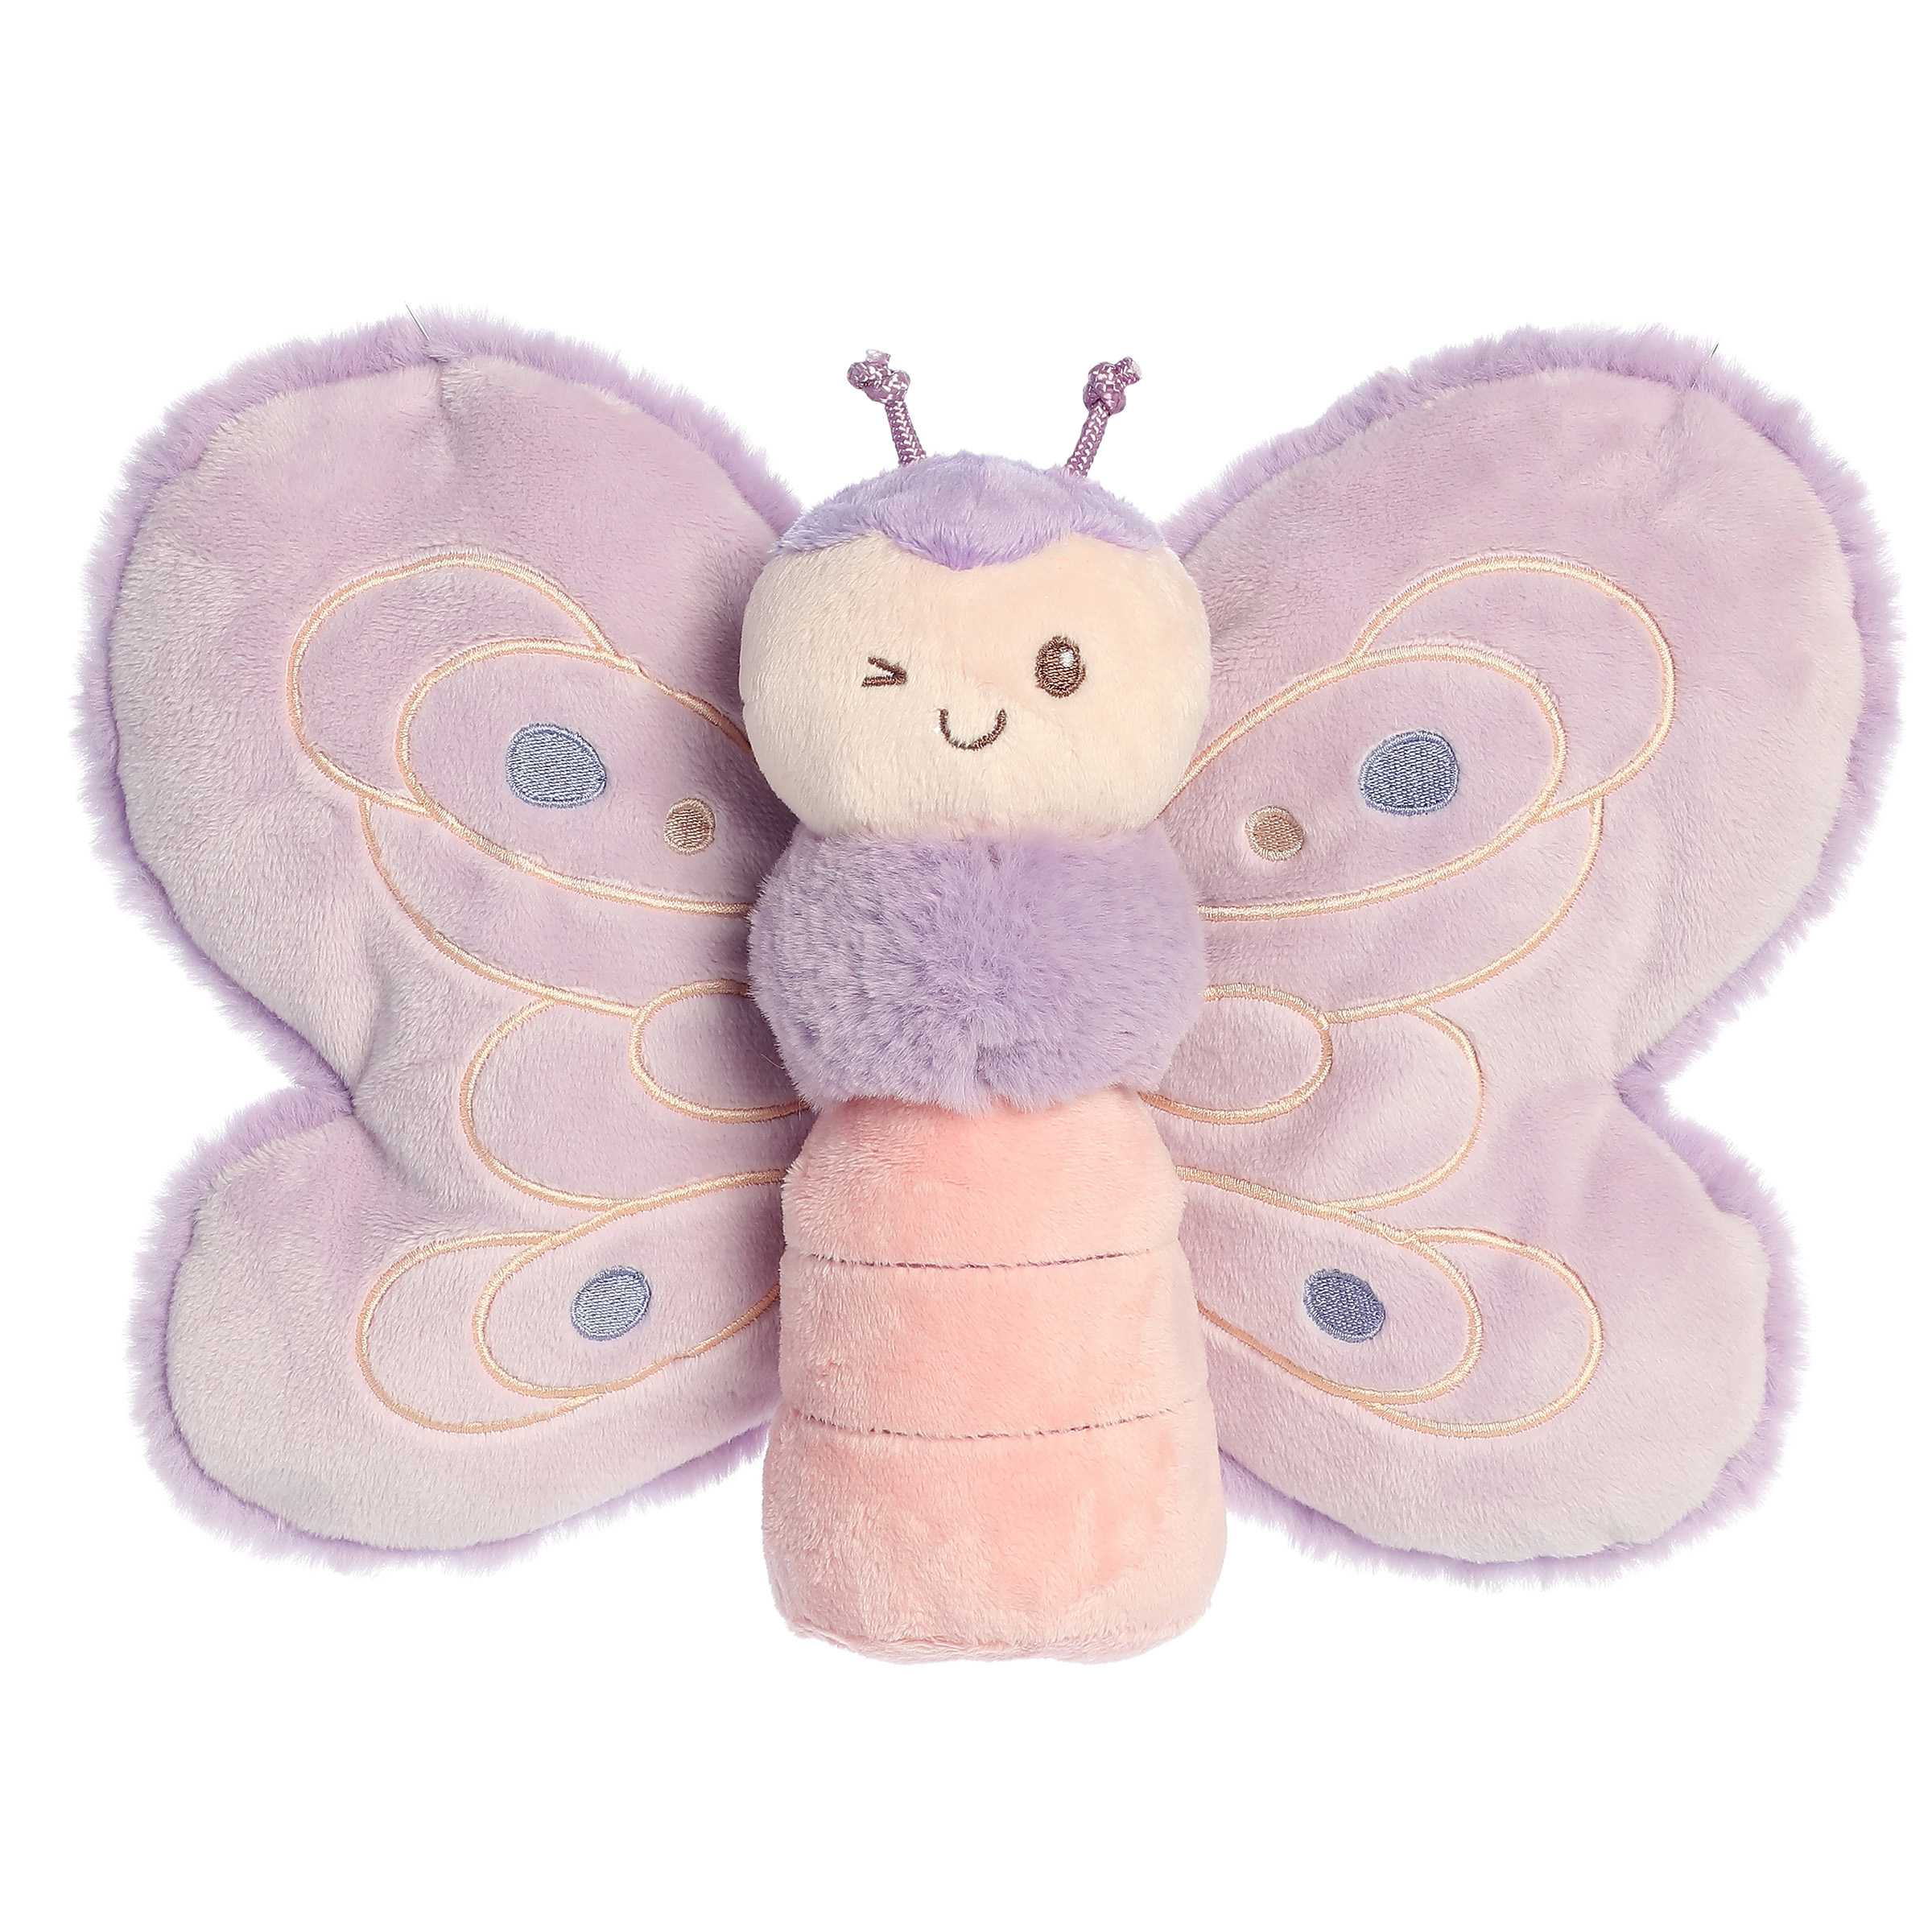 Lavender-winged butterfly plush with decorative patterns and a smiling face, crafted for tactile exploration, by ebba.